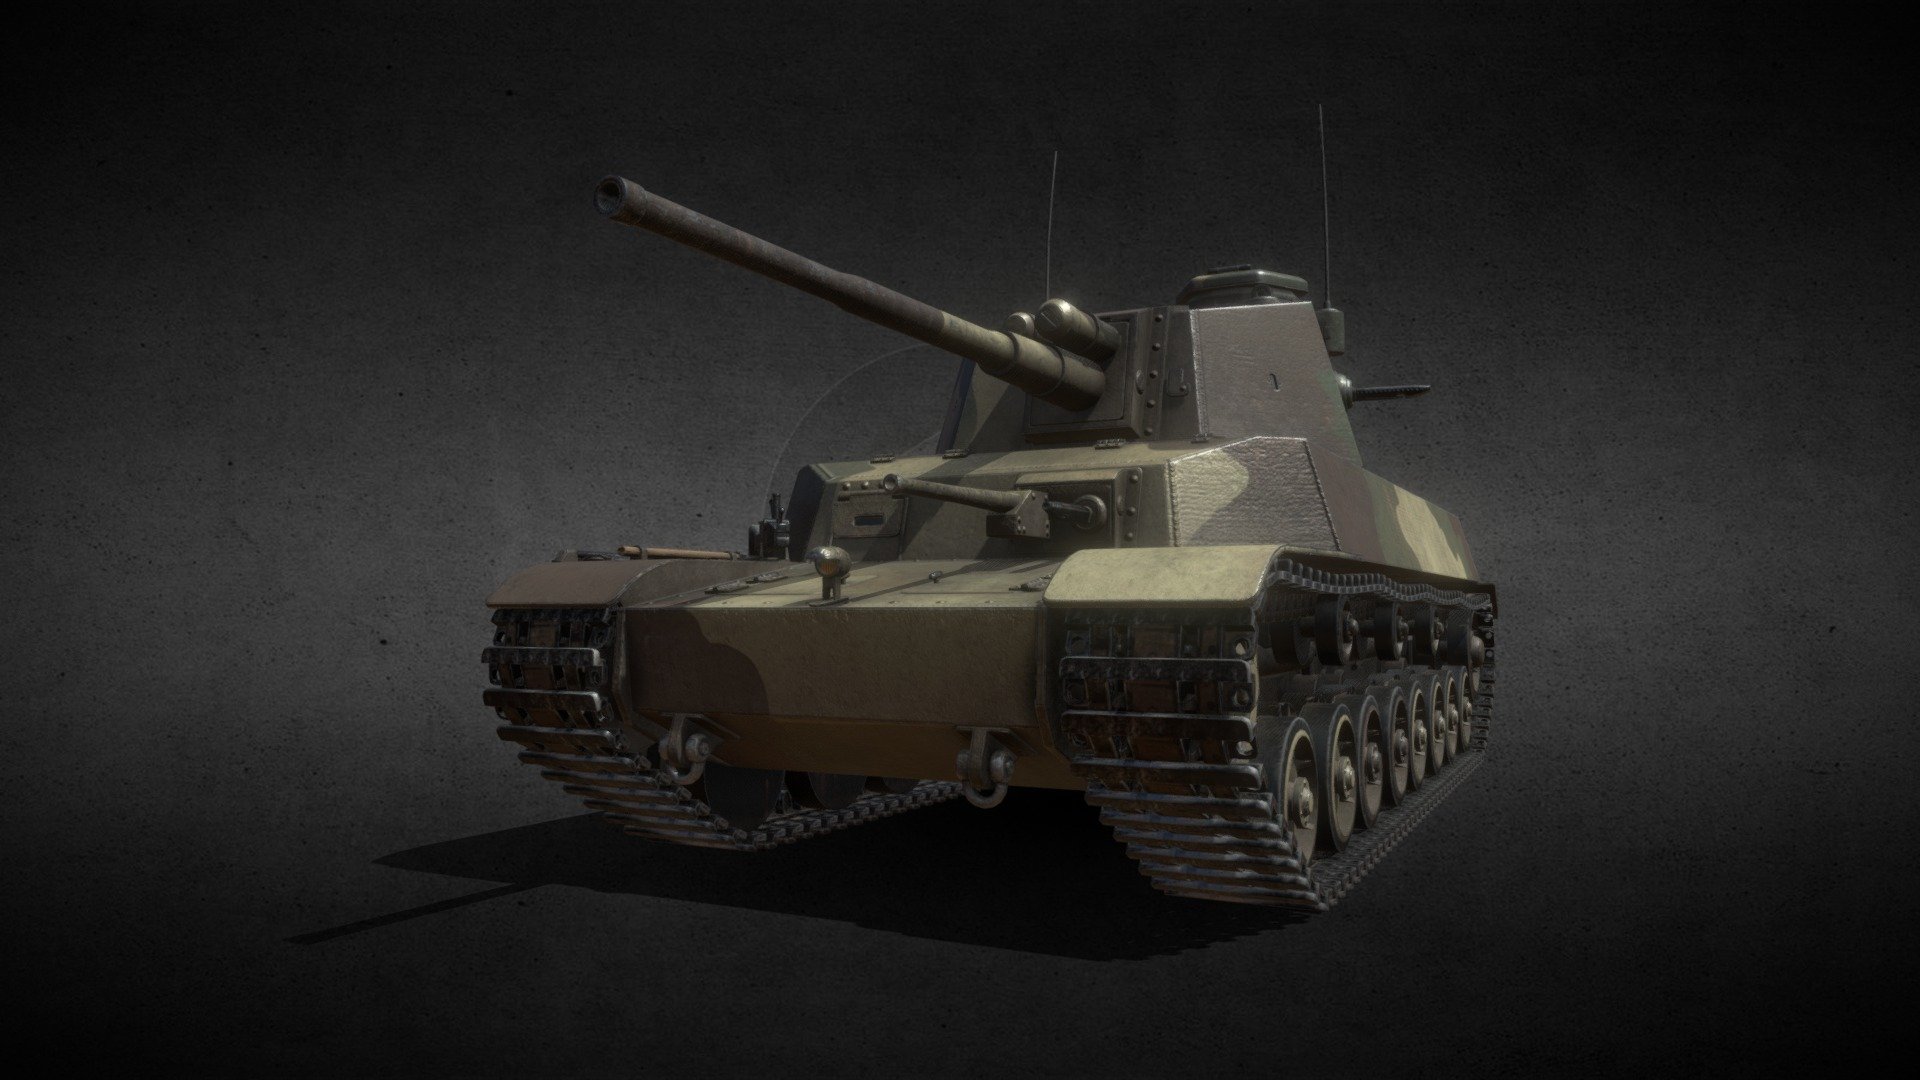 Ready to use Type 5 Chi-Ri 3d model

Type 5 Chi-Ri was a medium tank prototype developed to be a more powerful an overall better version of the previous prototype - the Type 4 Chi-To medium tank (3D model also avalible).
Only one incomplete prototype was built.

Tri-color camouflage variant.

Ready to use in games or renders.

More Japanese WW II models in the collection: https://skfb.ly/oyoDN

More Tanks and Parts models in the collection: https://skfb.ly/oyoDV

More cheap or free military models in the collection: https://skfb.ly/ooYNo

4096x4096 textures:


albedo
roughness
metalness
normal map
ambient occulusion map

modelled in Blender textured in Adobe Substance 3D Painter - Type 5 Chi-Ri (IJA Medium Tank) - Buy Royalty Free 3D model by AdamKozakGrafika 3d model